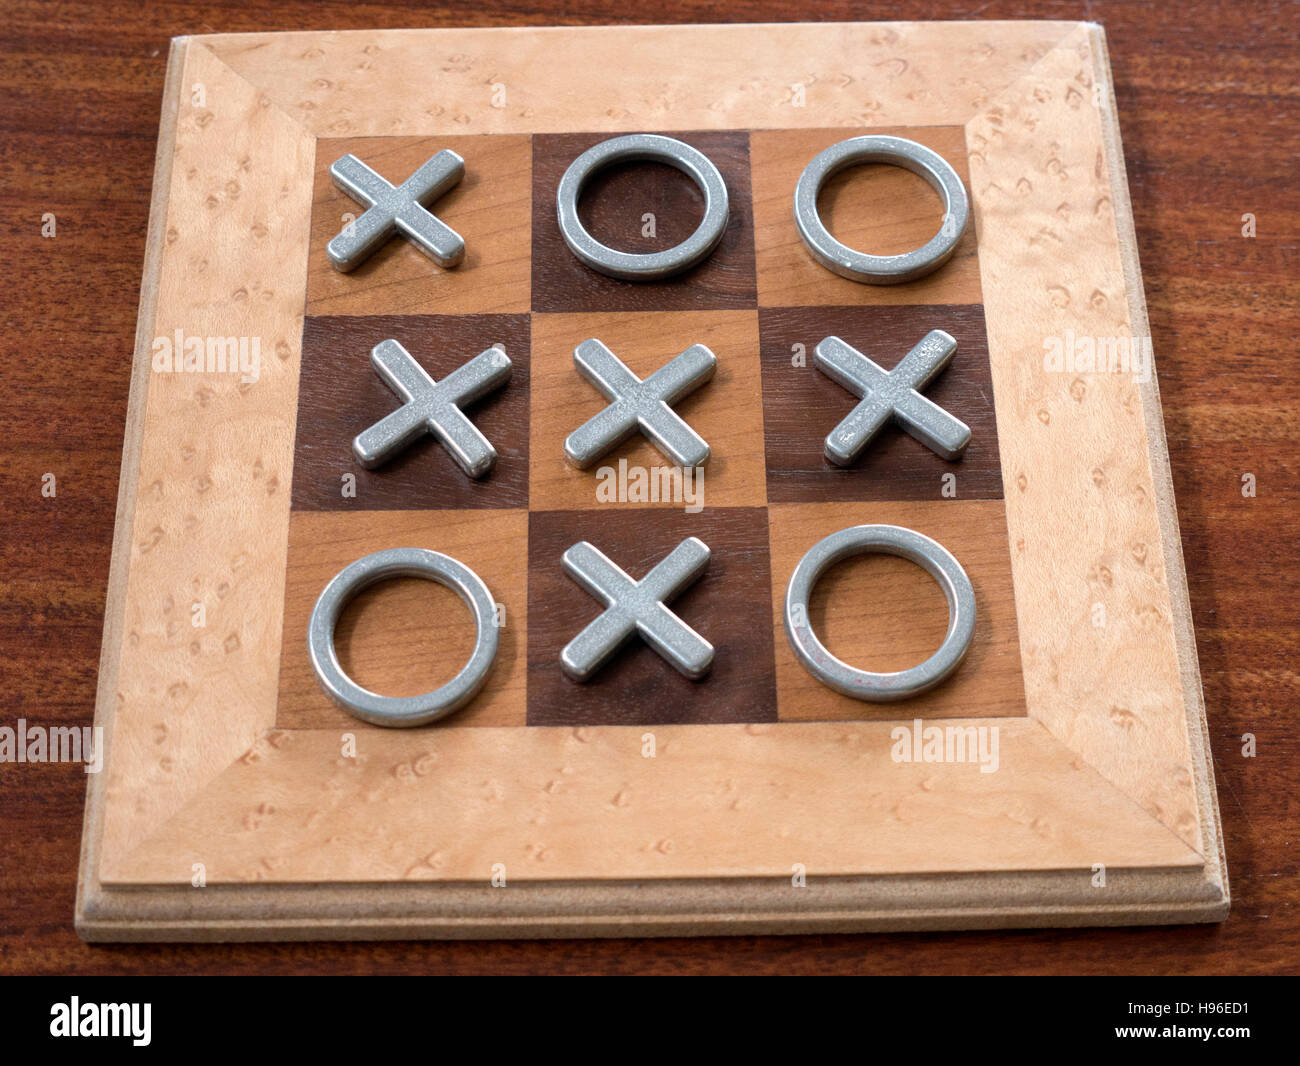 noughts and crosses game Stock Photo